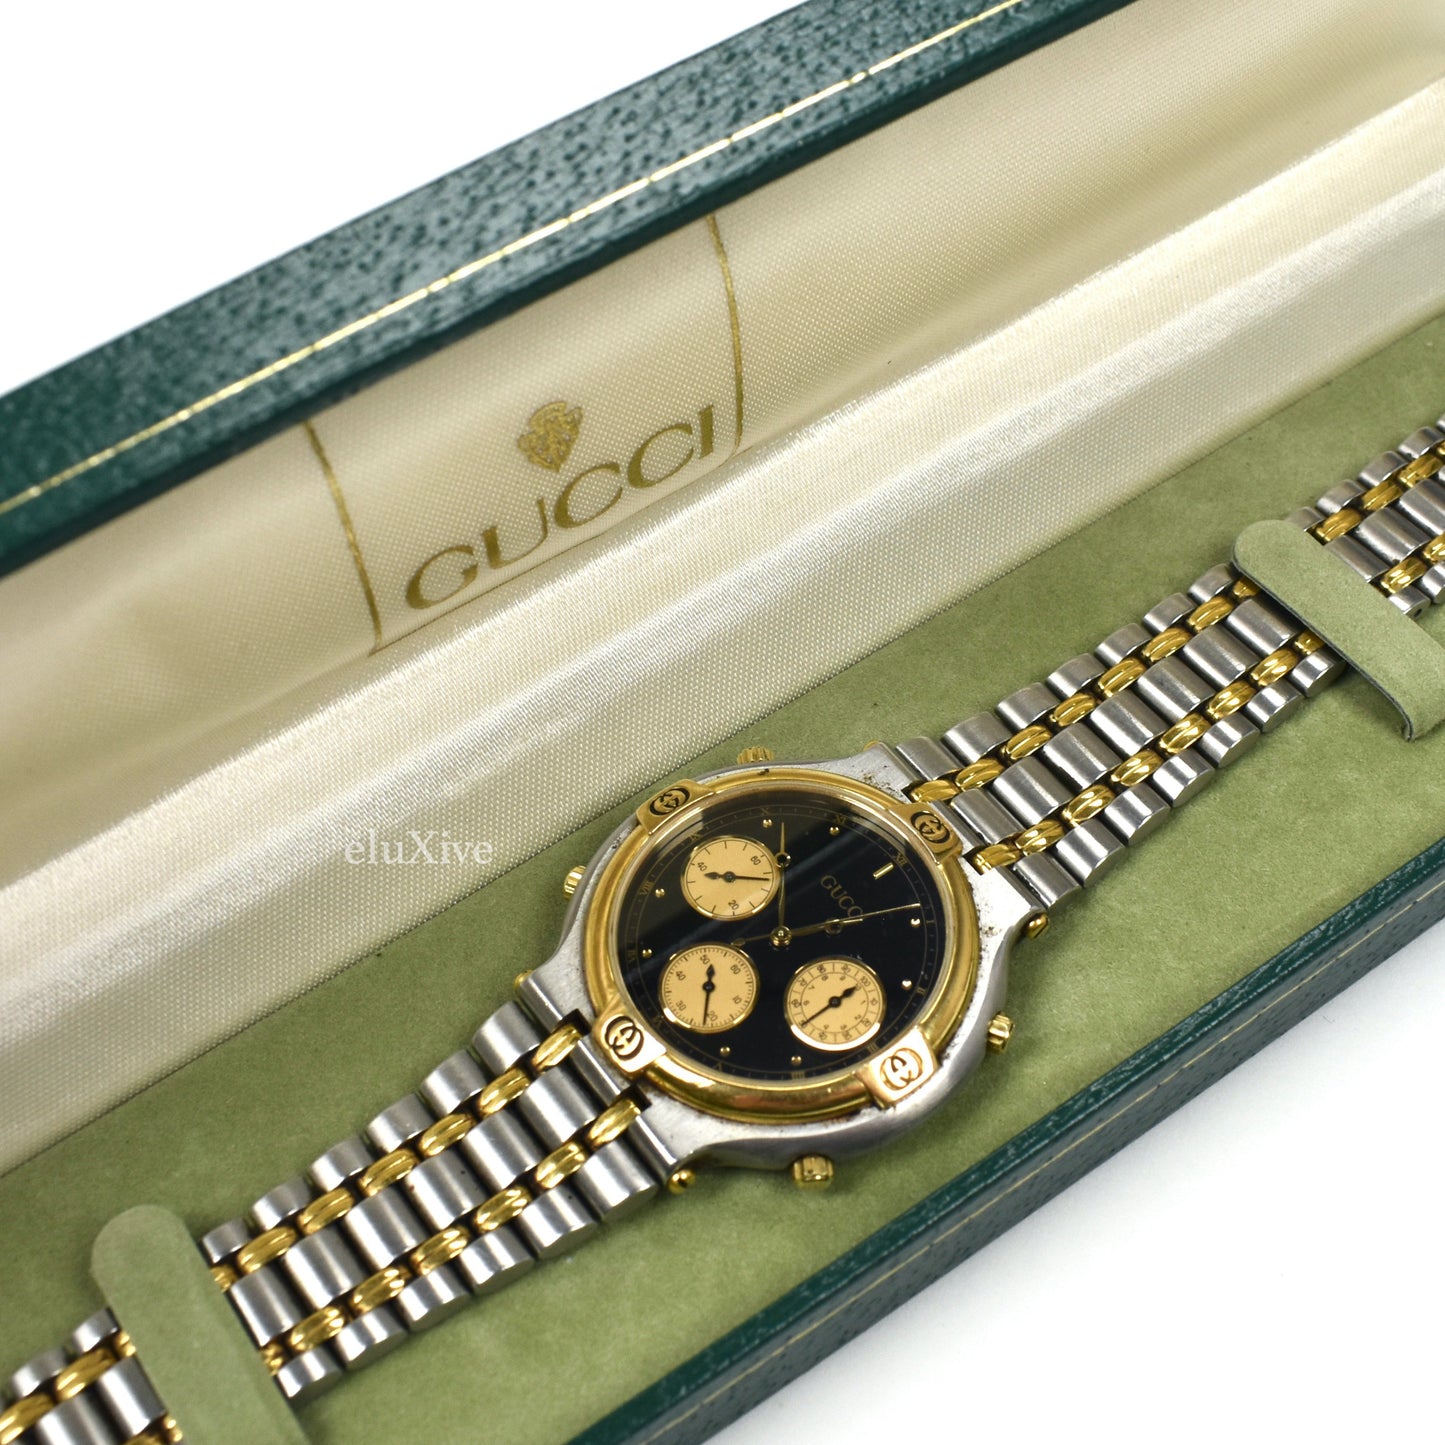 Gucci - 9400M Steel/Gold Chronograph Watch